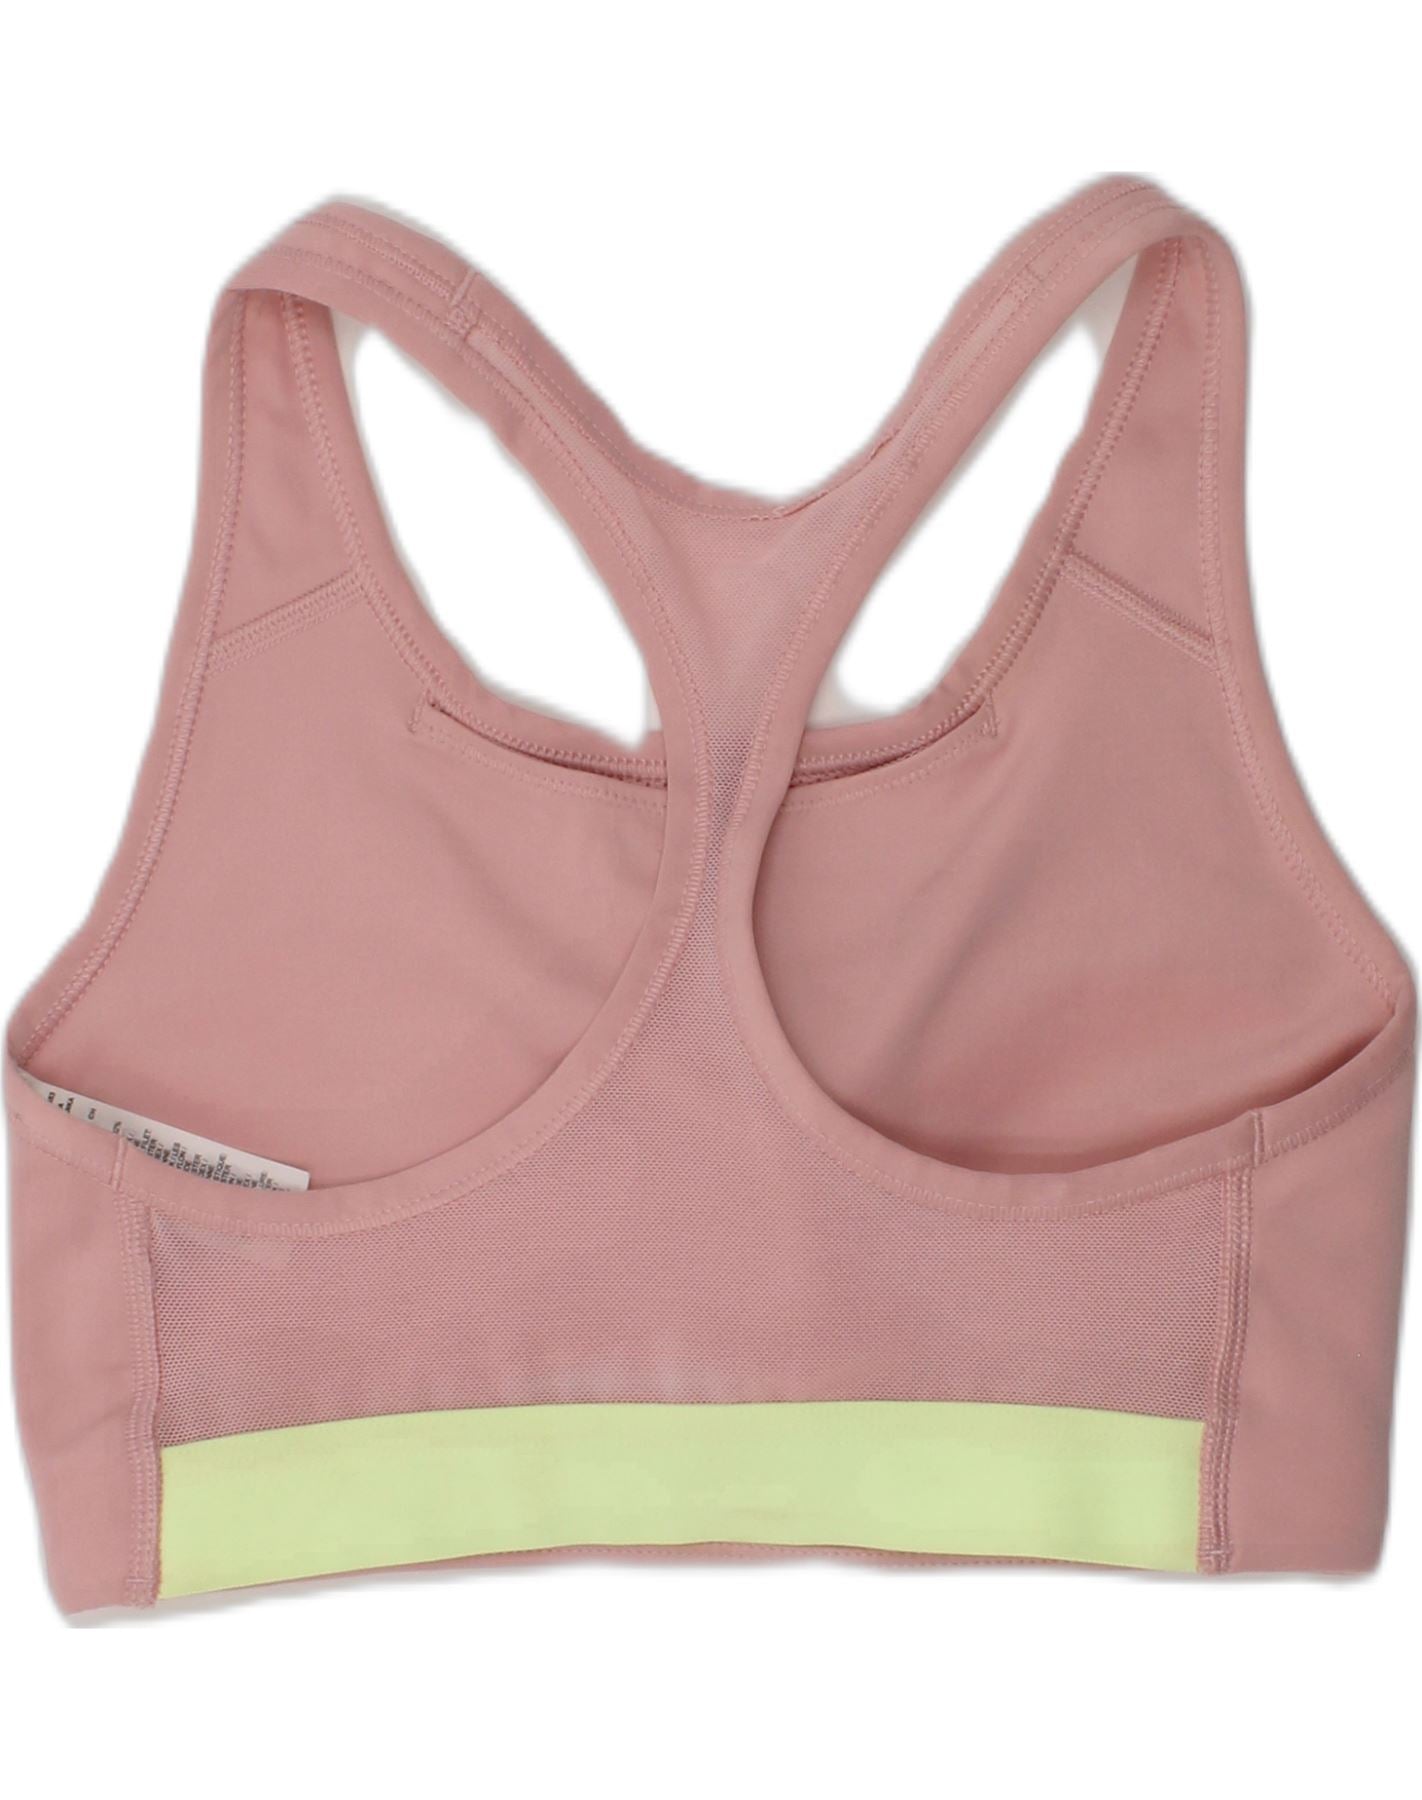 NIKE Womens Graphic Sport Bra Top UK 8 Small Pink Polyester Sports, Vintage & Second-Hand Clothing Online